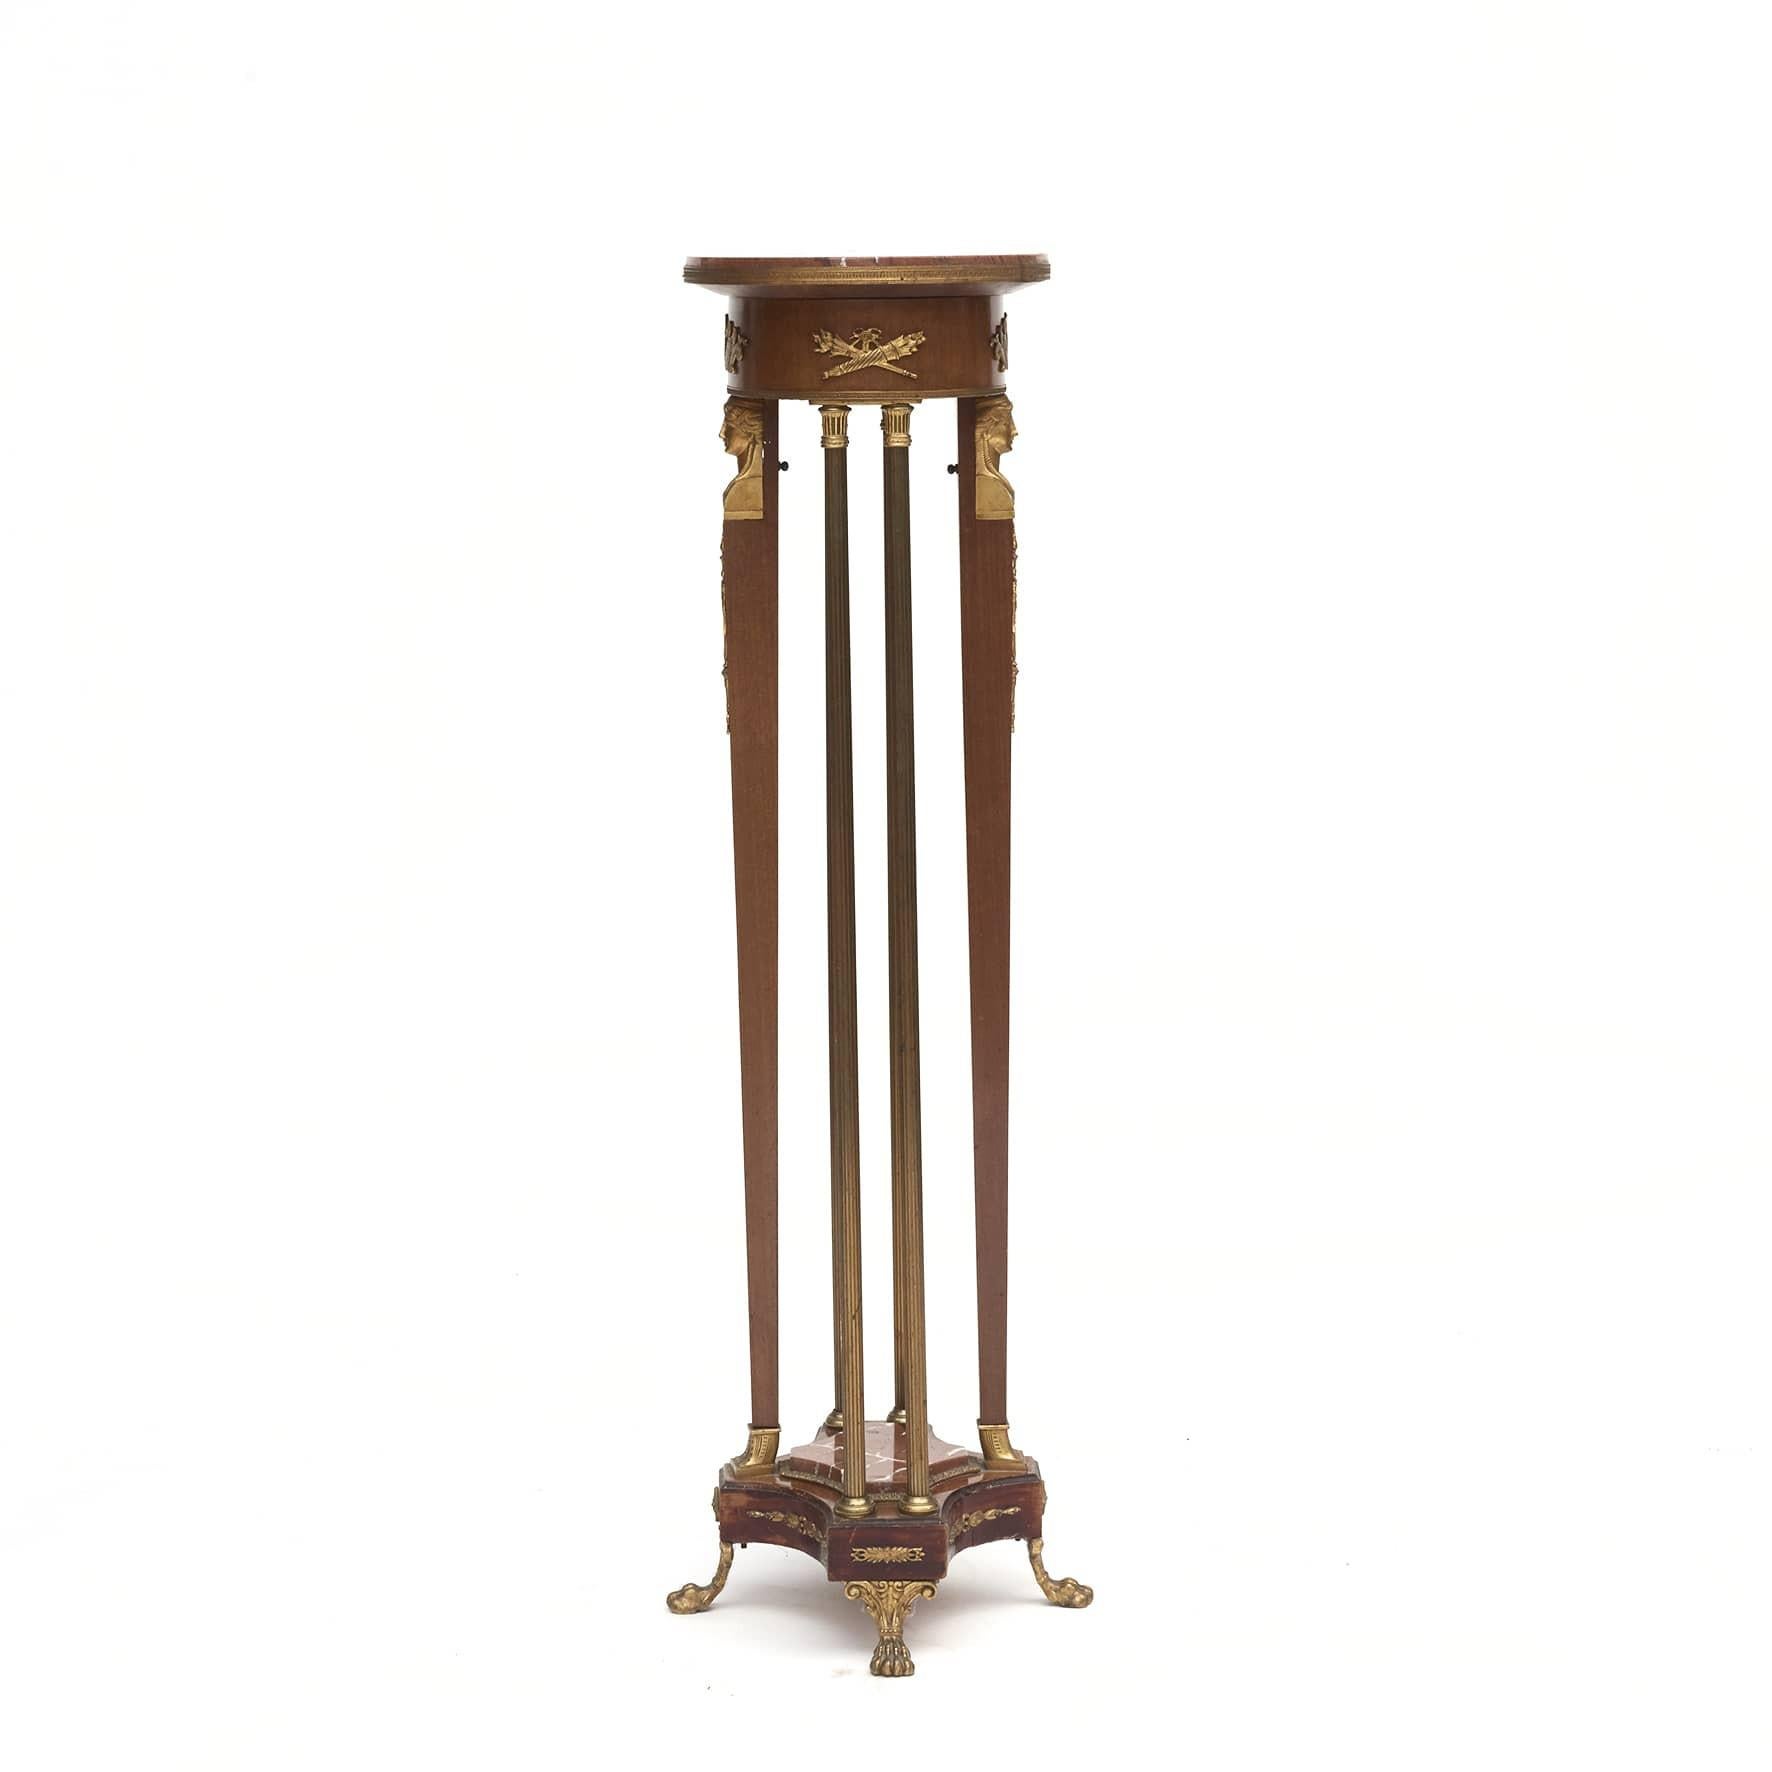 Pedestal Louis XVI style. Mahogany with gilded bronze mounting in the form of swans on the apron under the plate.

Two legs in mahogany, top with gilded bronze heads.
On each side fluted bronze columns.
Base finished with gilded bronze animal